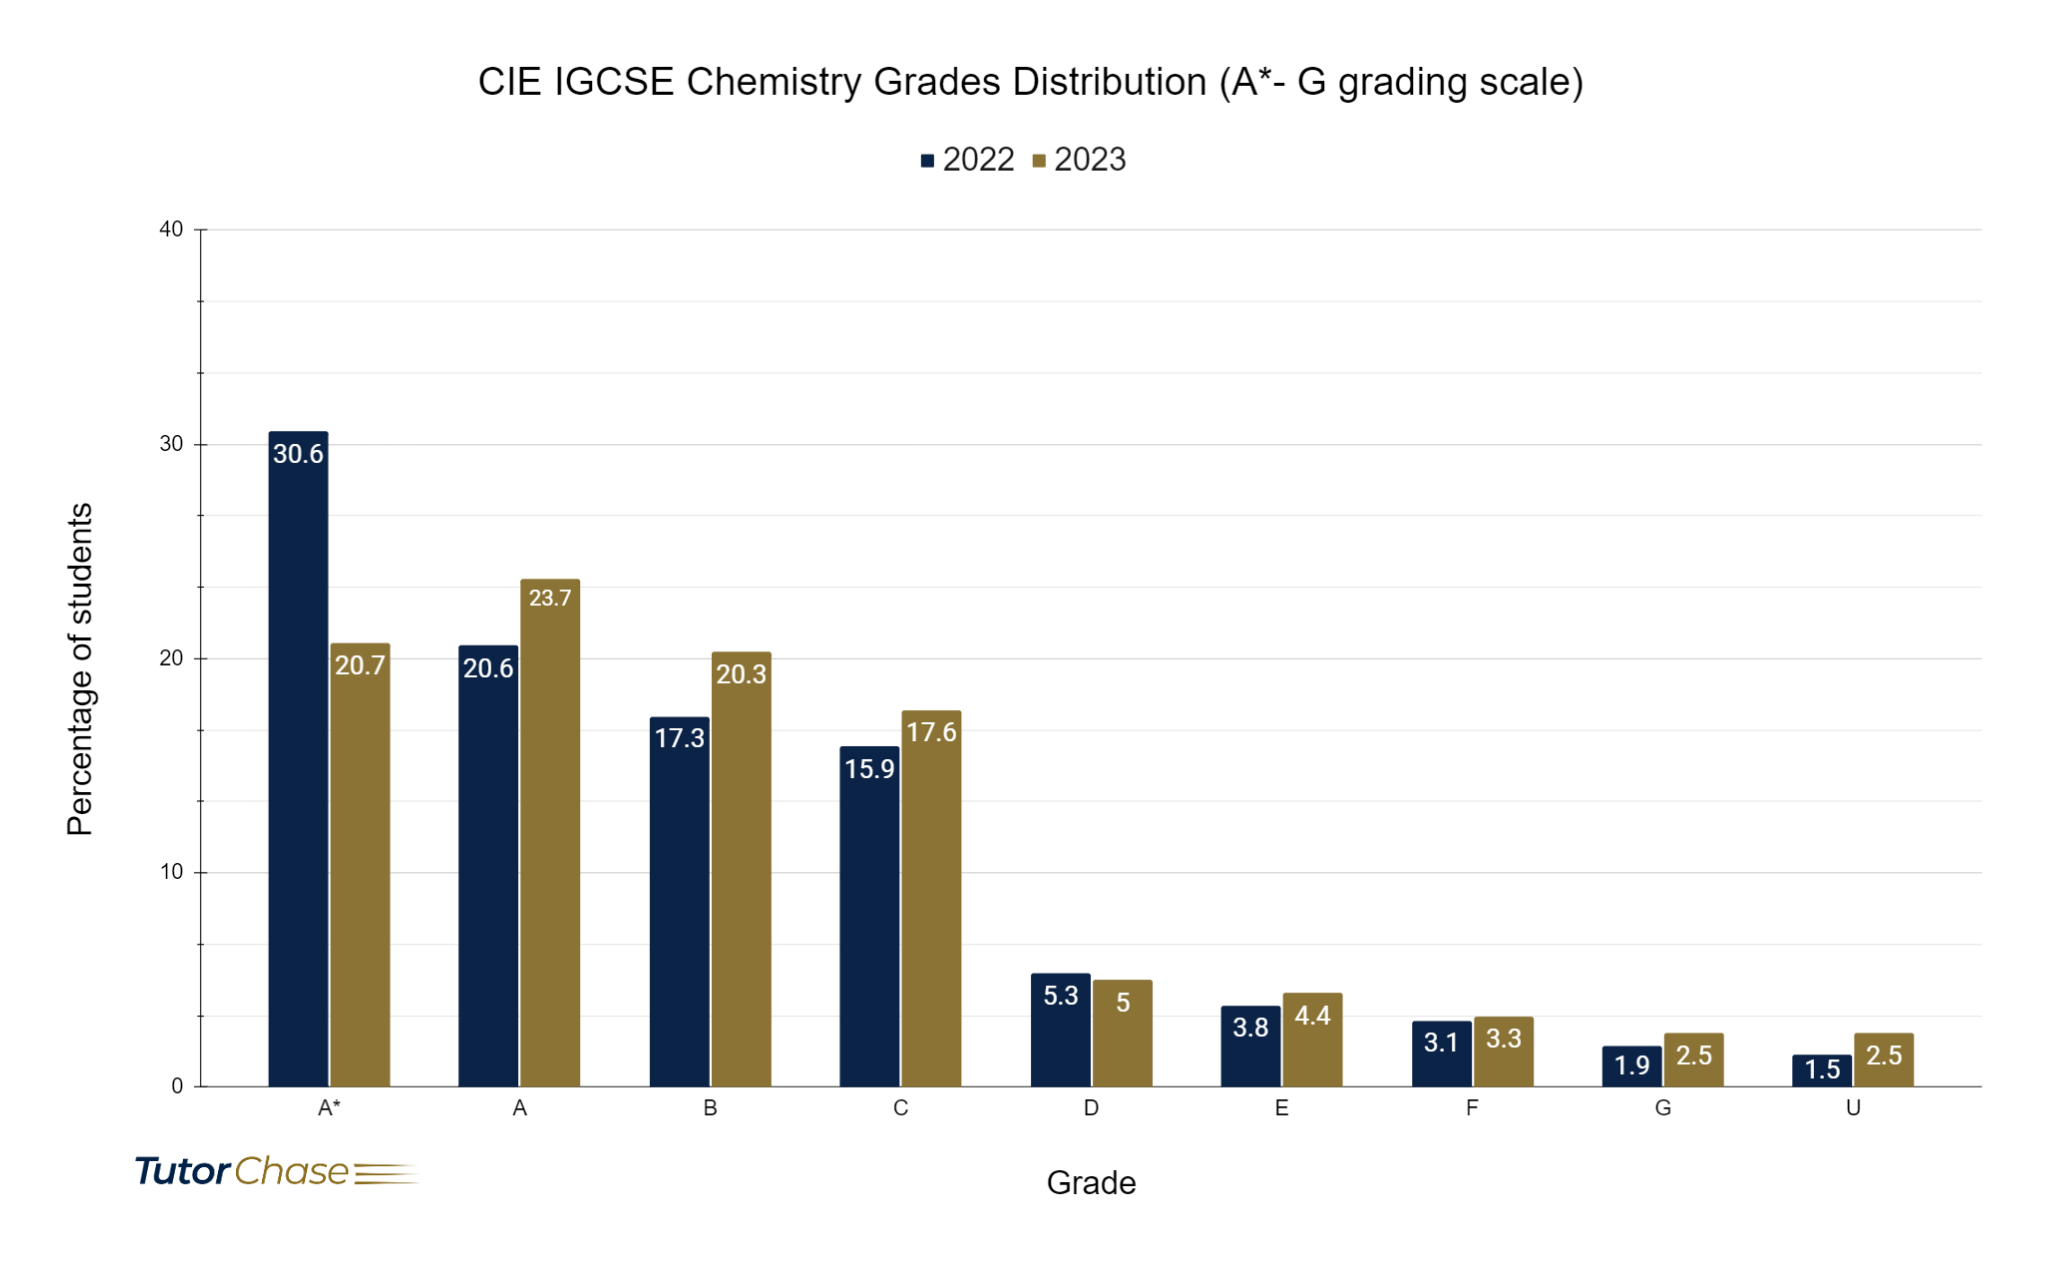 Grades distribution of CIE IGCSE Chemistry for 2022 and 2023